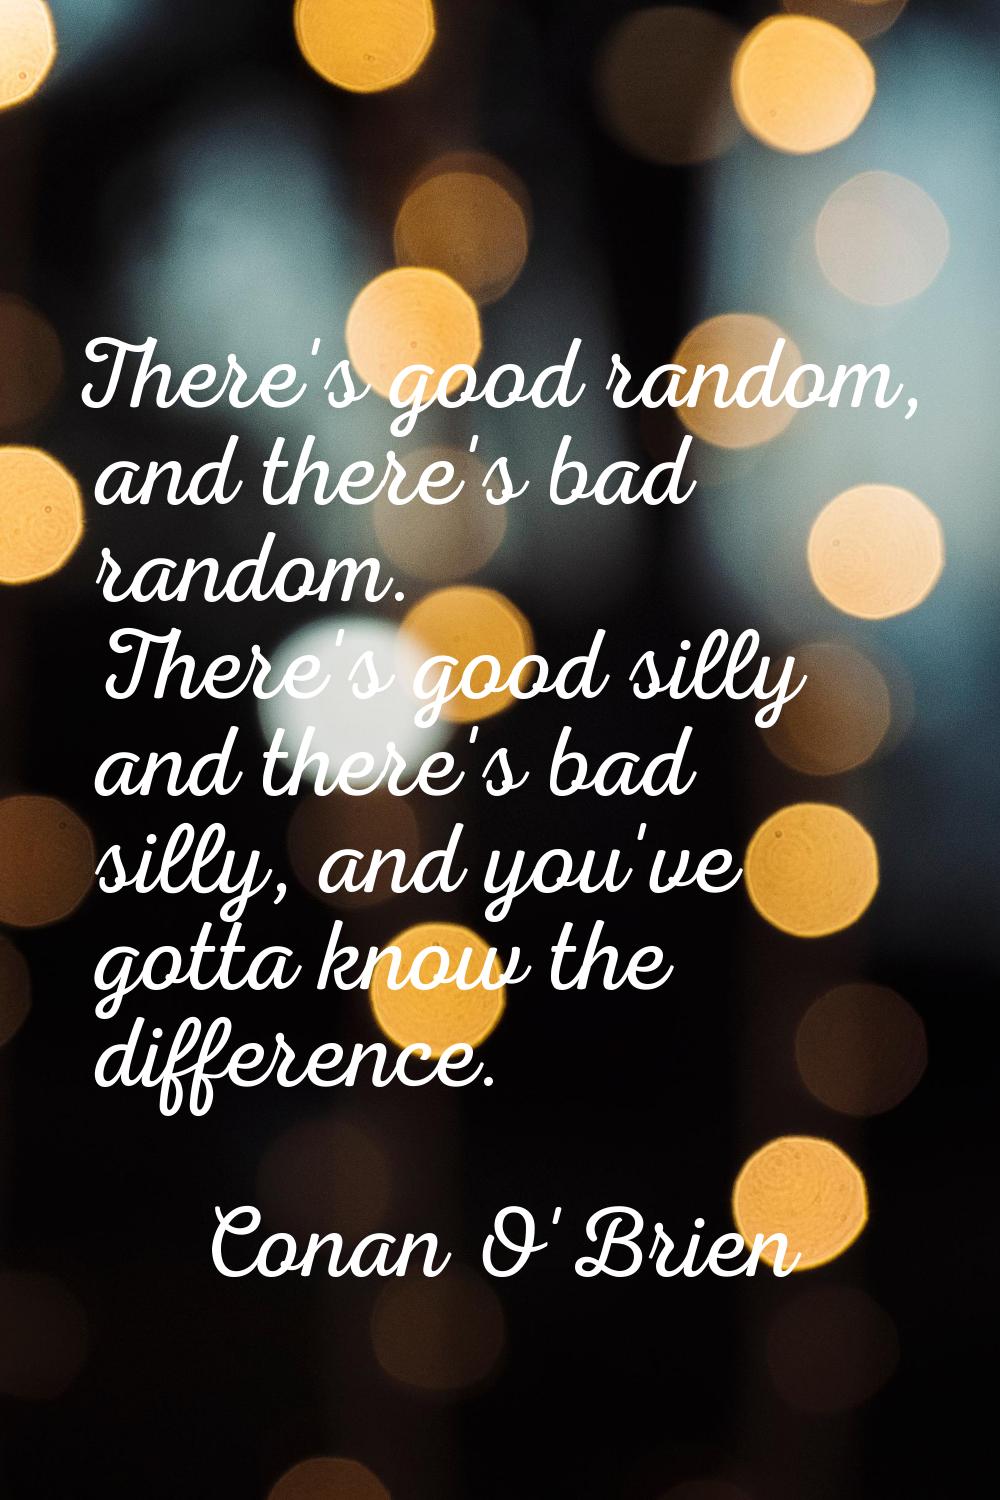 There's good random, and there's bad random. There's good silly and there's bad silly, and you've g